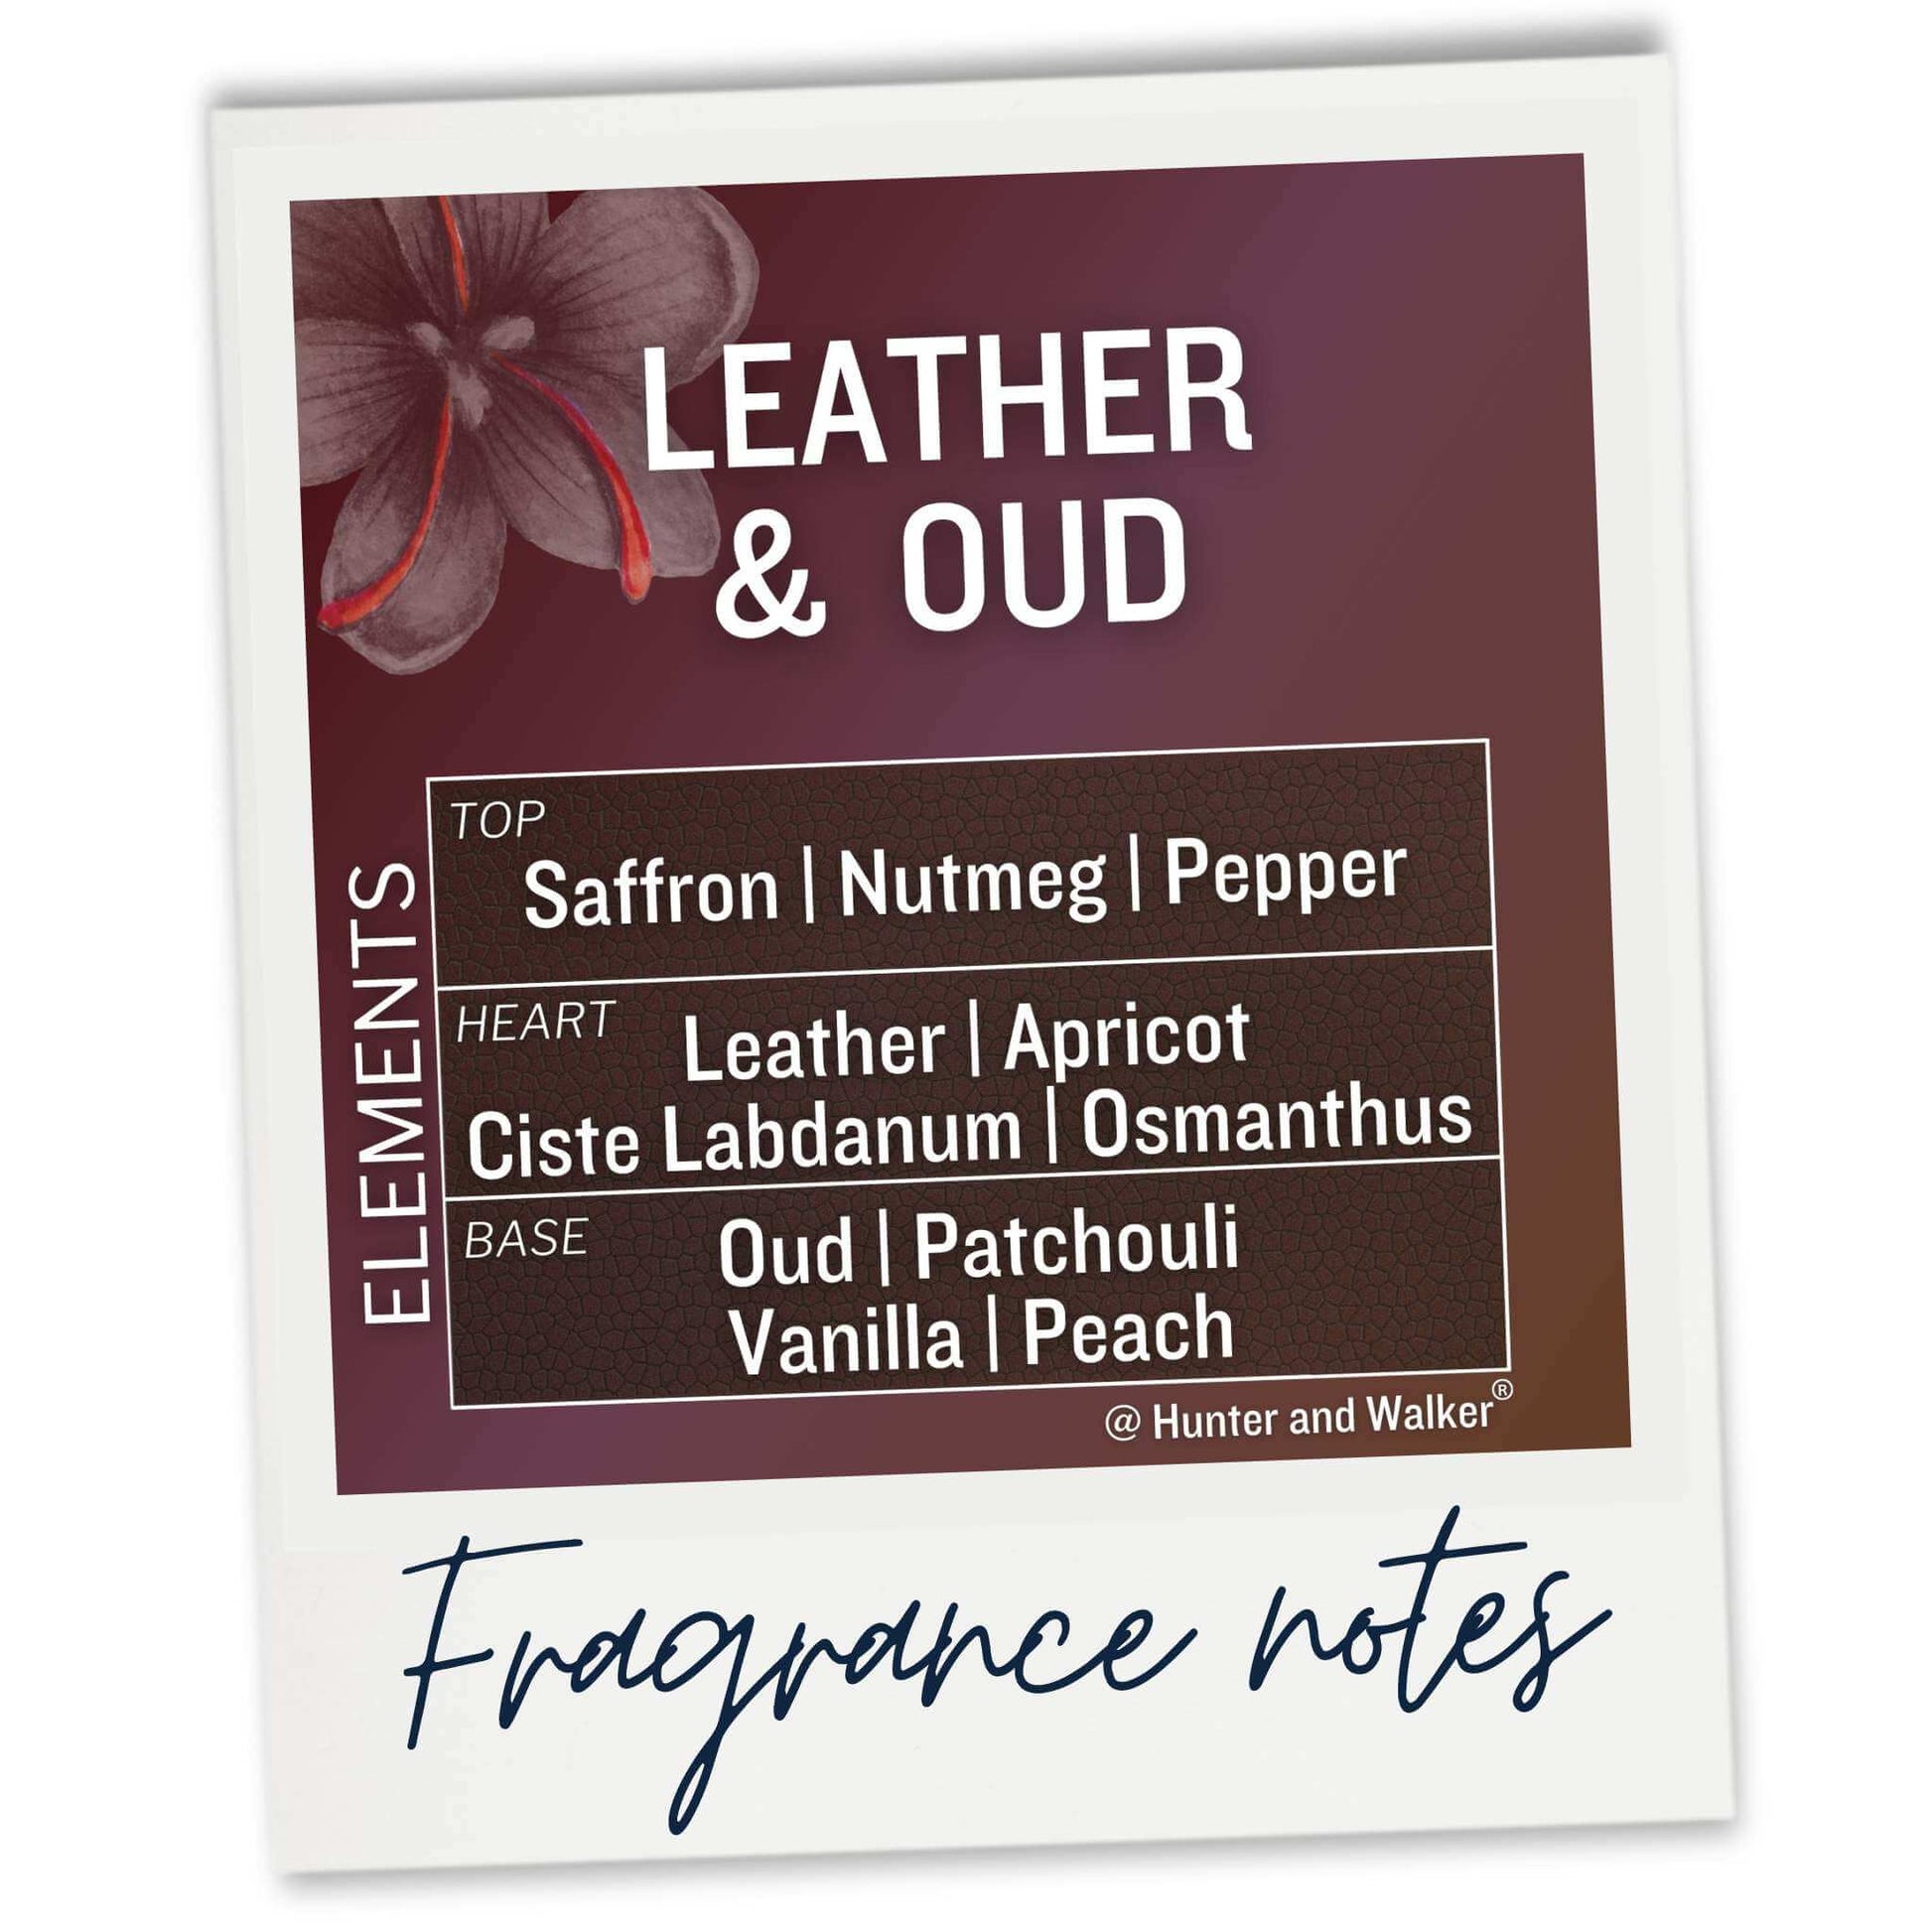 Leather and Oud fragrance notes